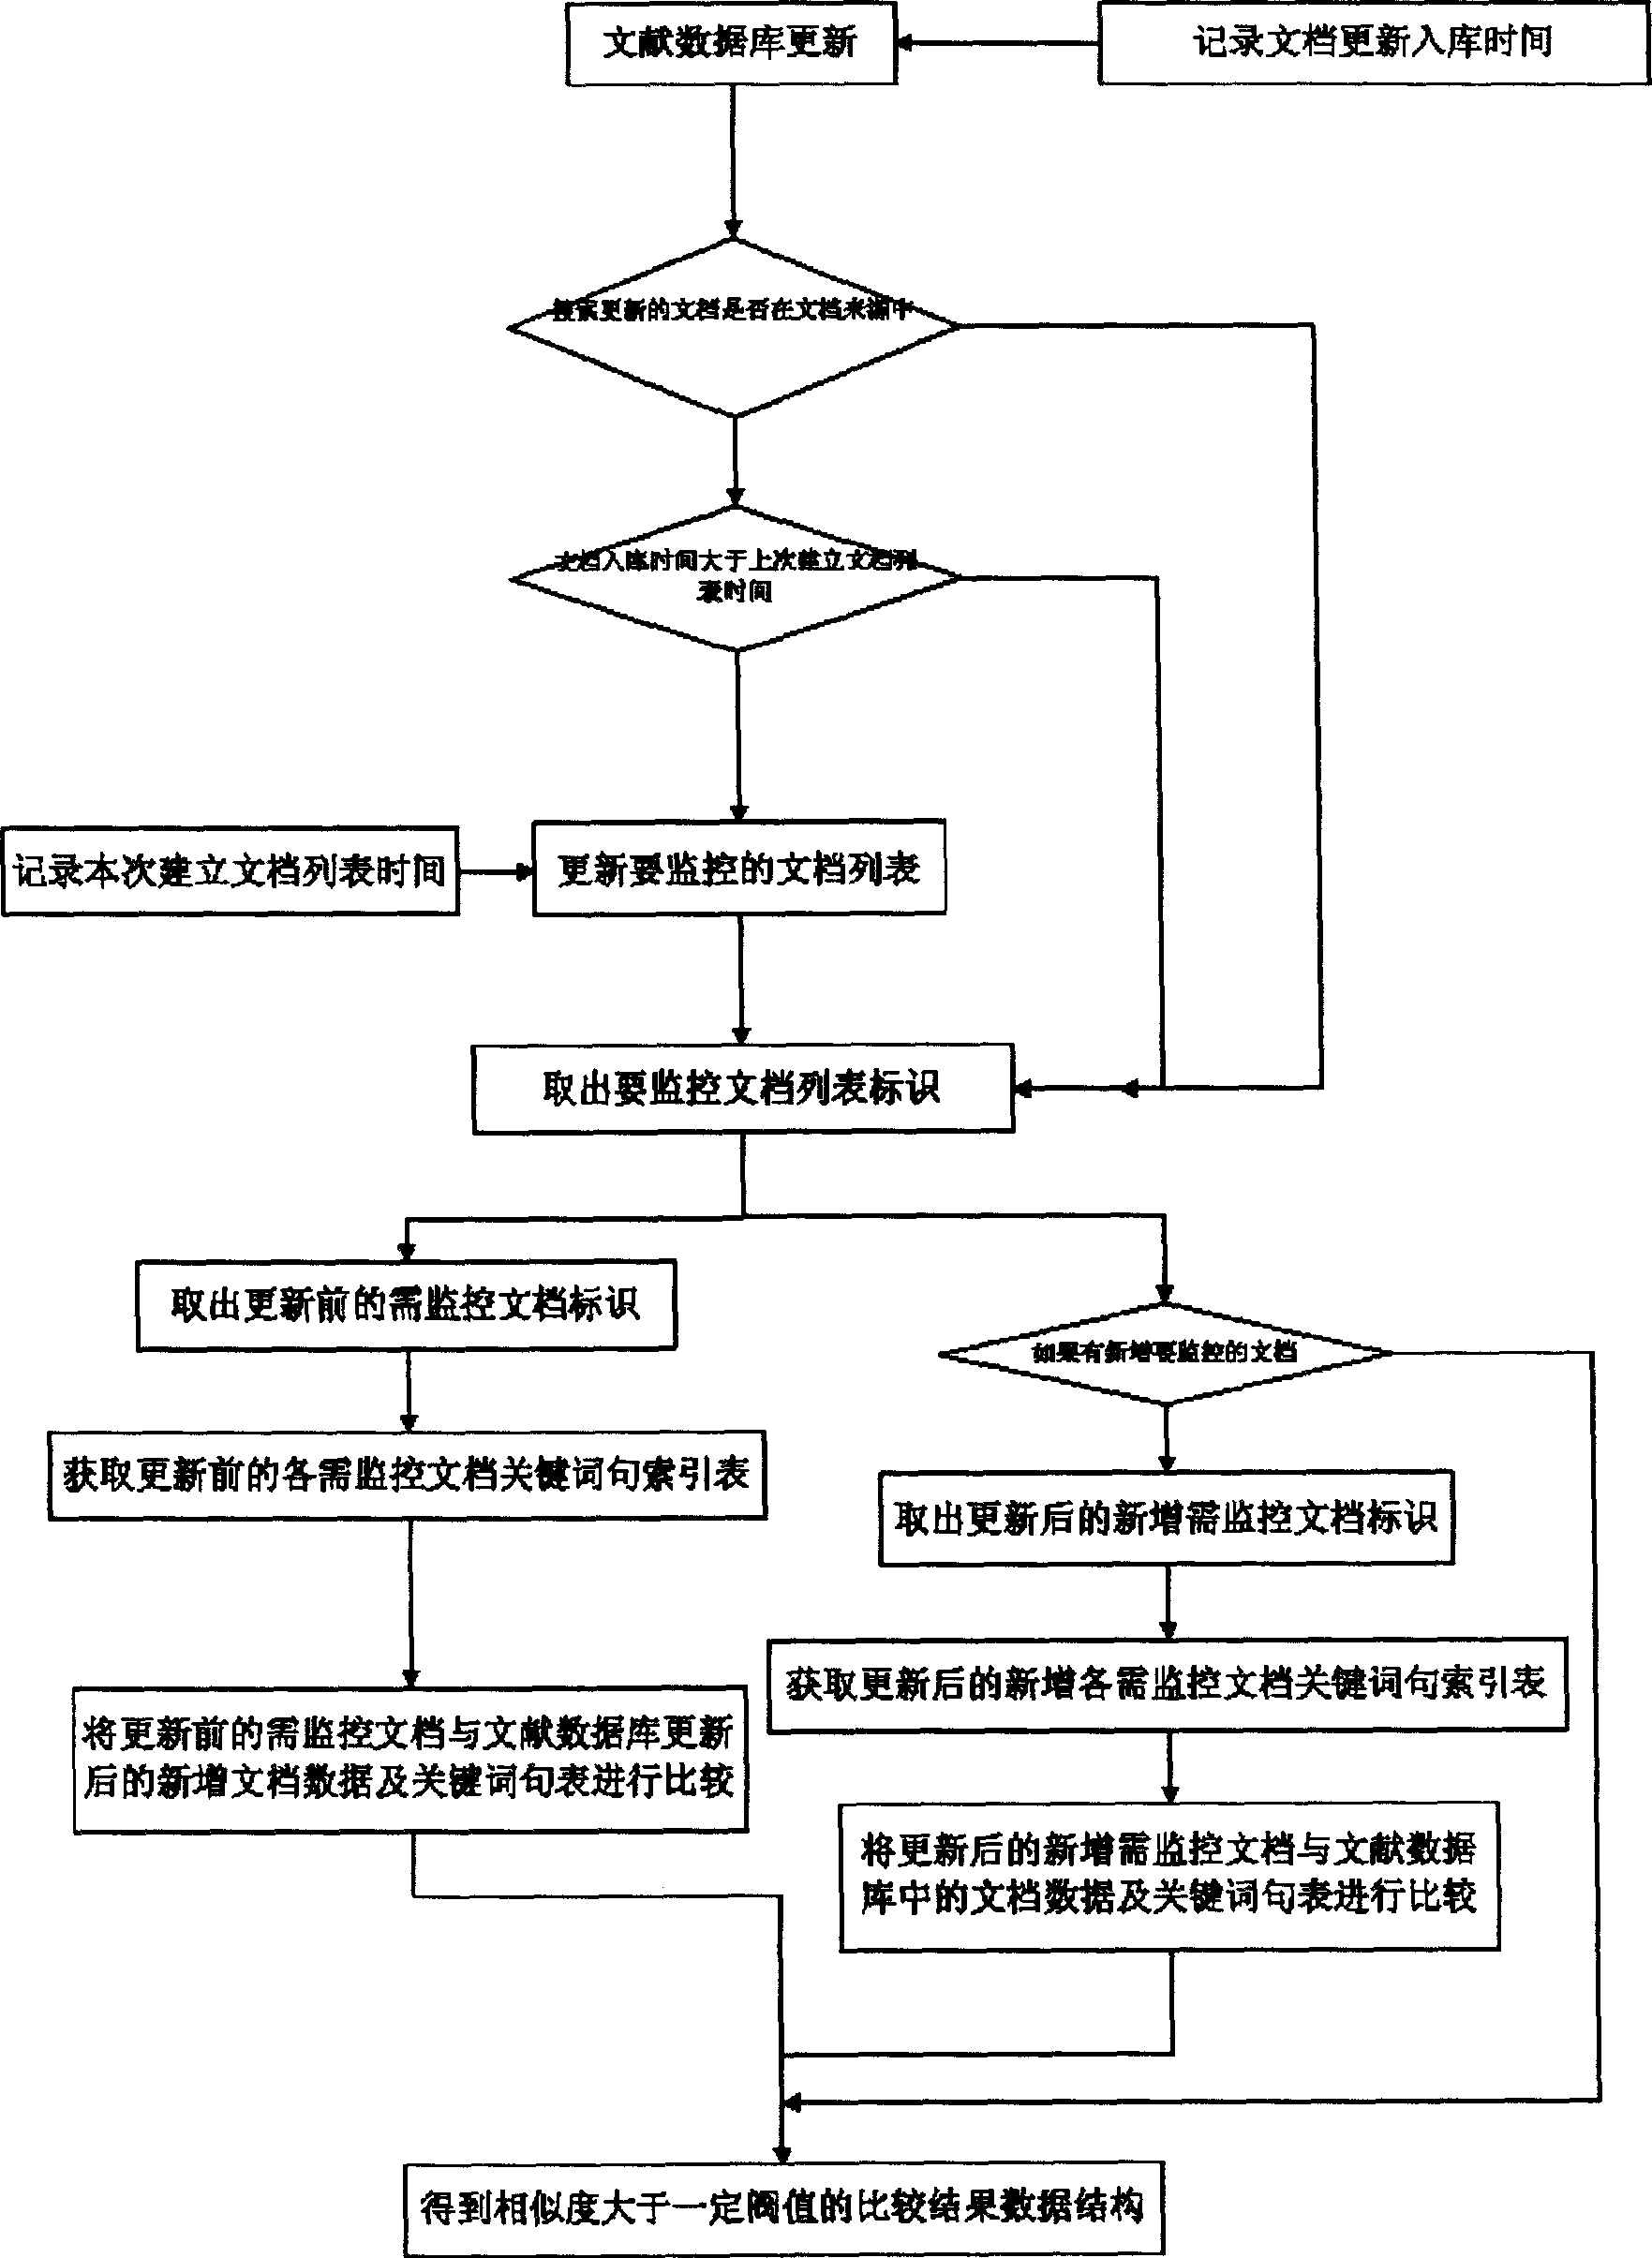 Transfer prevention or/and cribbing prevention monitoring method based on computer network